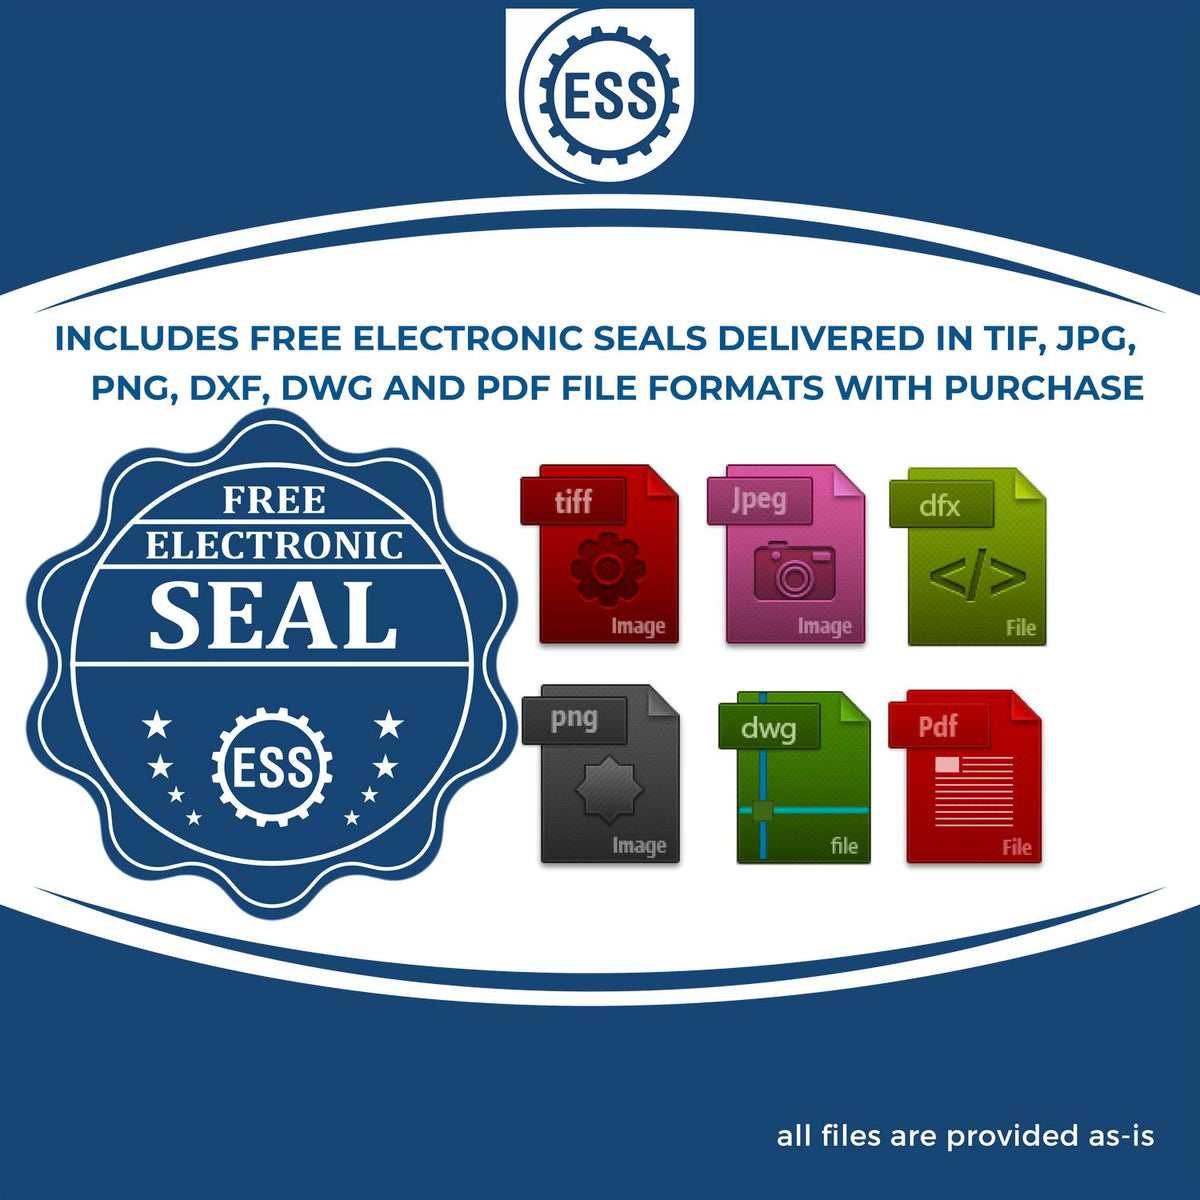 An infographic for the free electronic seal for the State of New Jersey Long Reach Architectural Embossing Seal illustrating the different file type icons such as DXF, DWG, TIF, JPG and PNG.